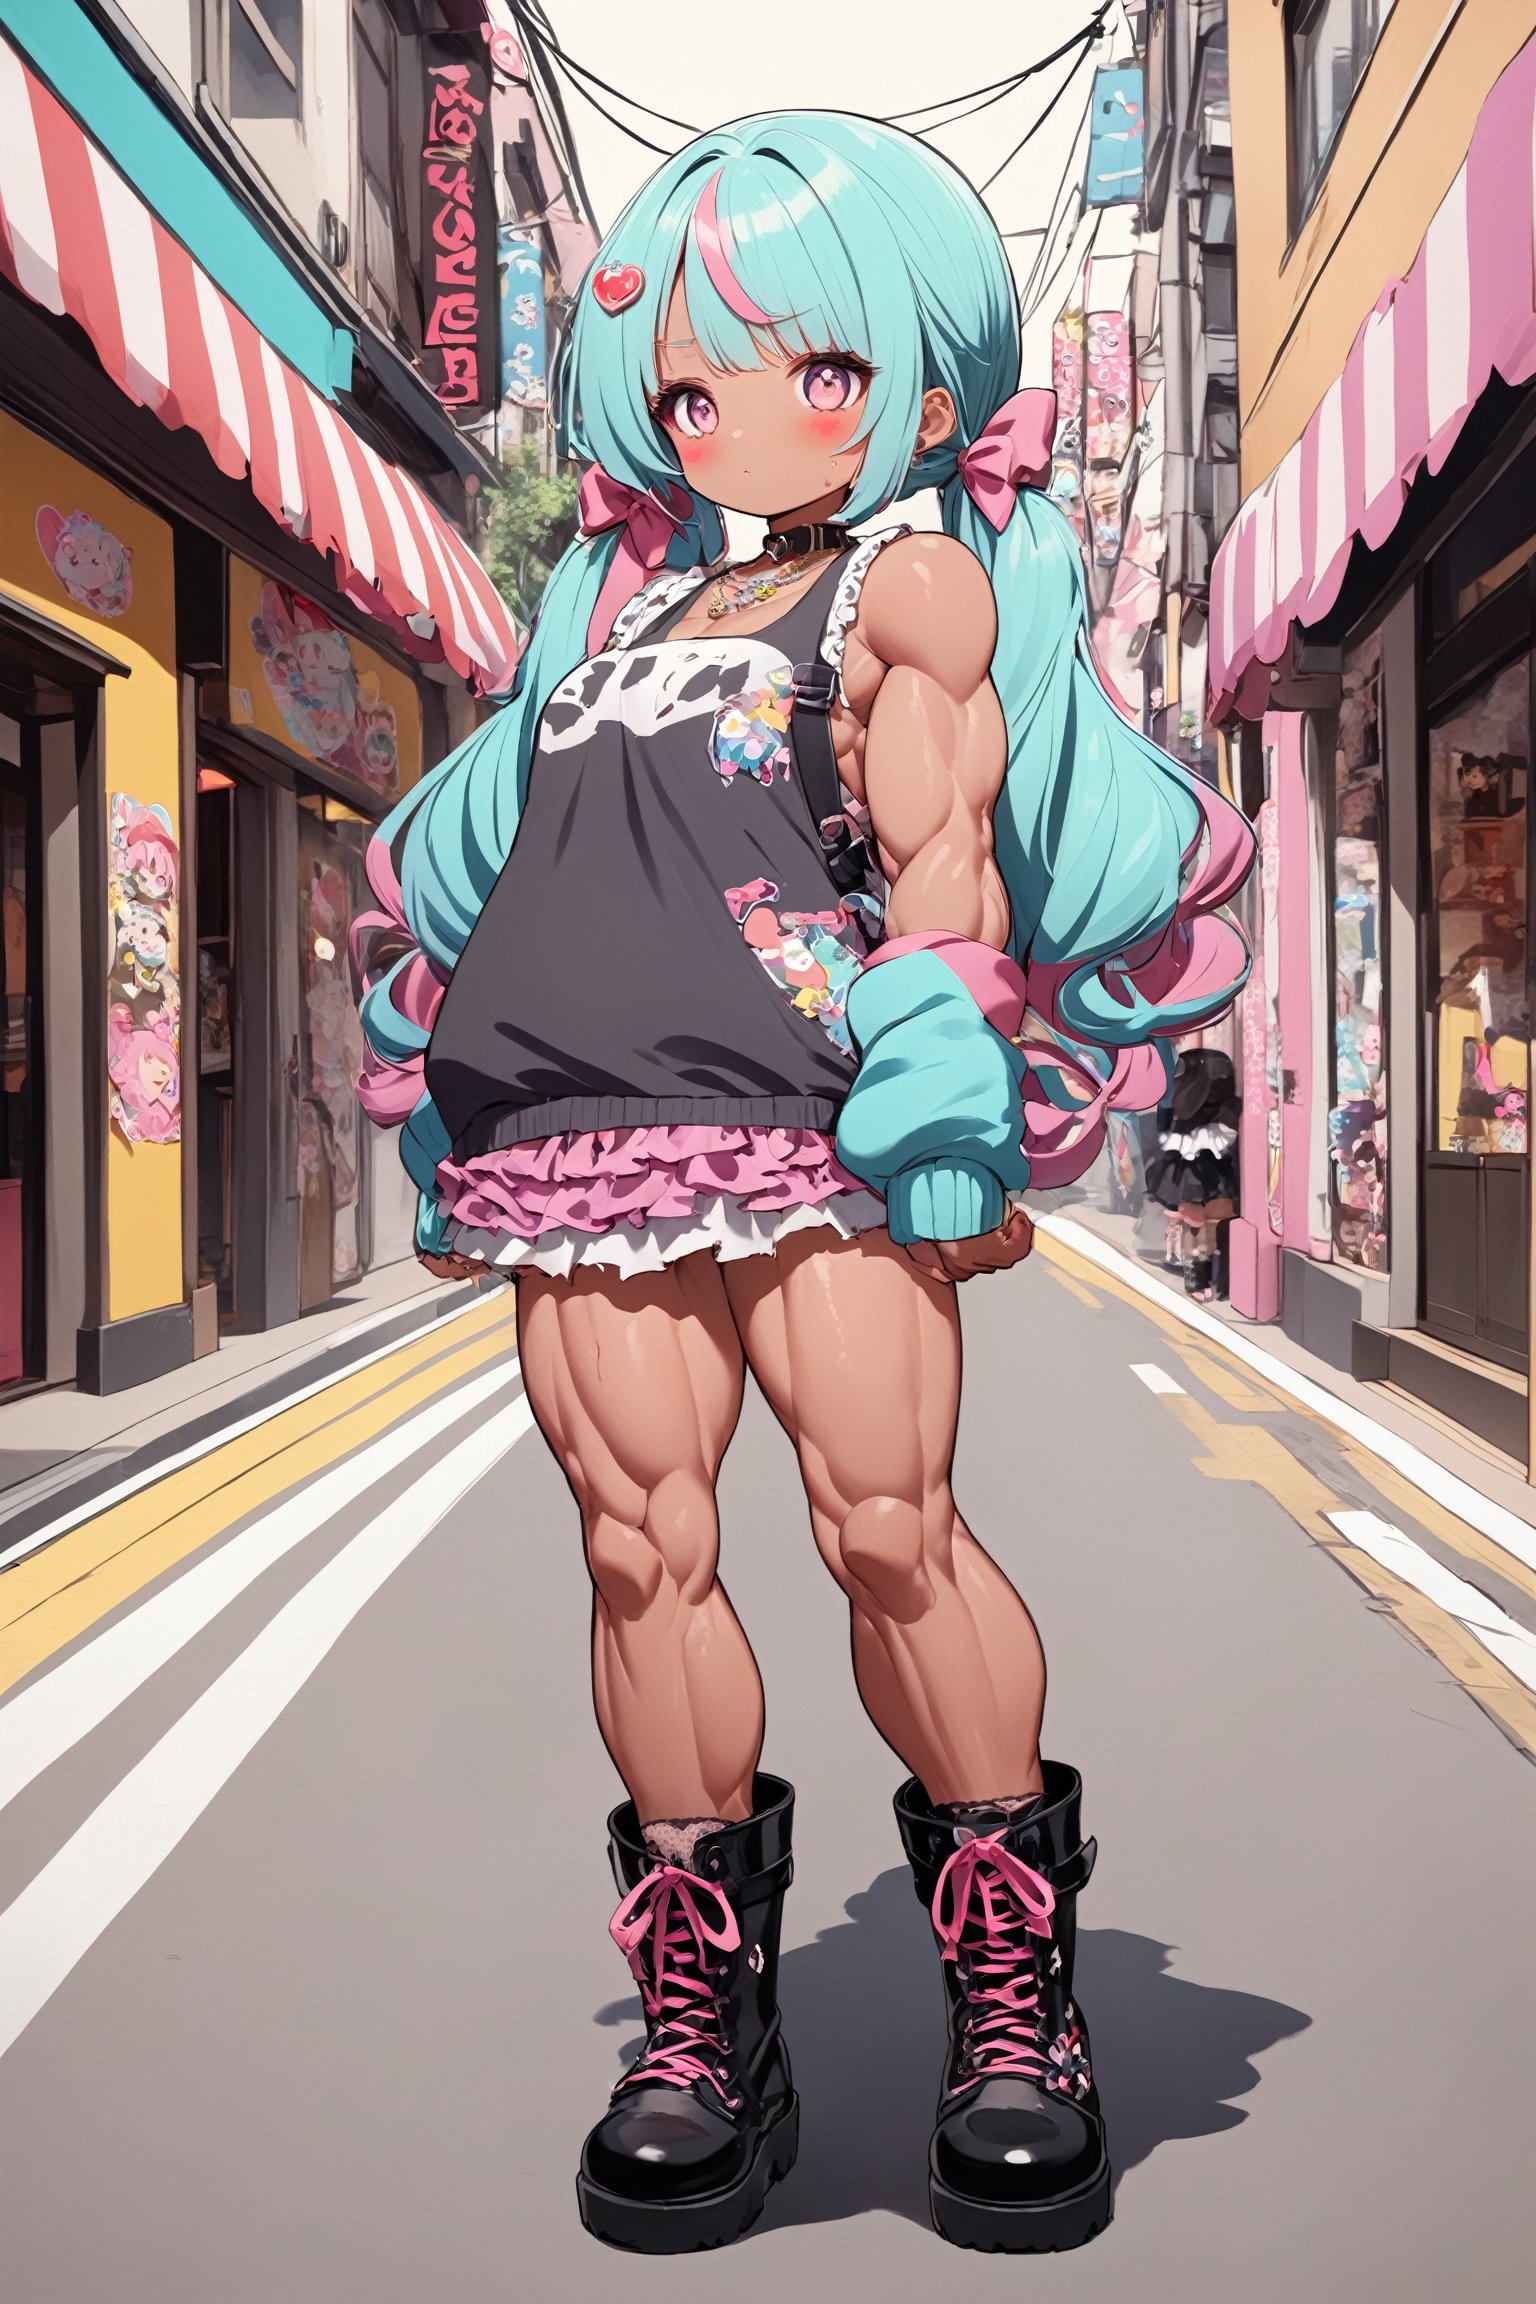 1girl,ultra cute,
Harajuku Style grunge fashion with kawaii and Lolita themes,She wears a distressed pastel dress with lace, an oversized torn cardigan, and chunky Combat boots, (((Super muscular body, amazing bulk body:1.5
))),Her pastel-streaked pigtails are adorned with bows and clips, and her makeup features glitter and heart-shaped stickers. She stands in a vibrant Harajuku street, blending sweetness with a rebellious edge.,Ground Mine Girl,Muscle